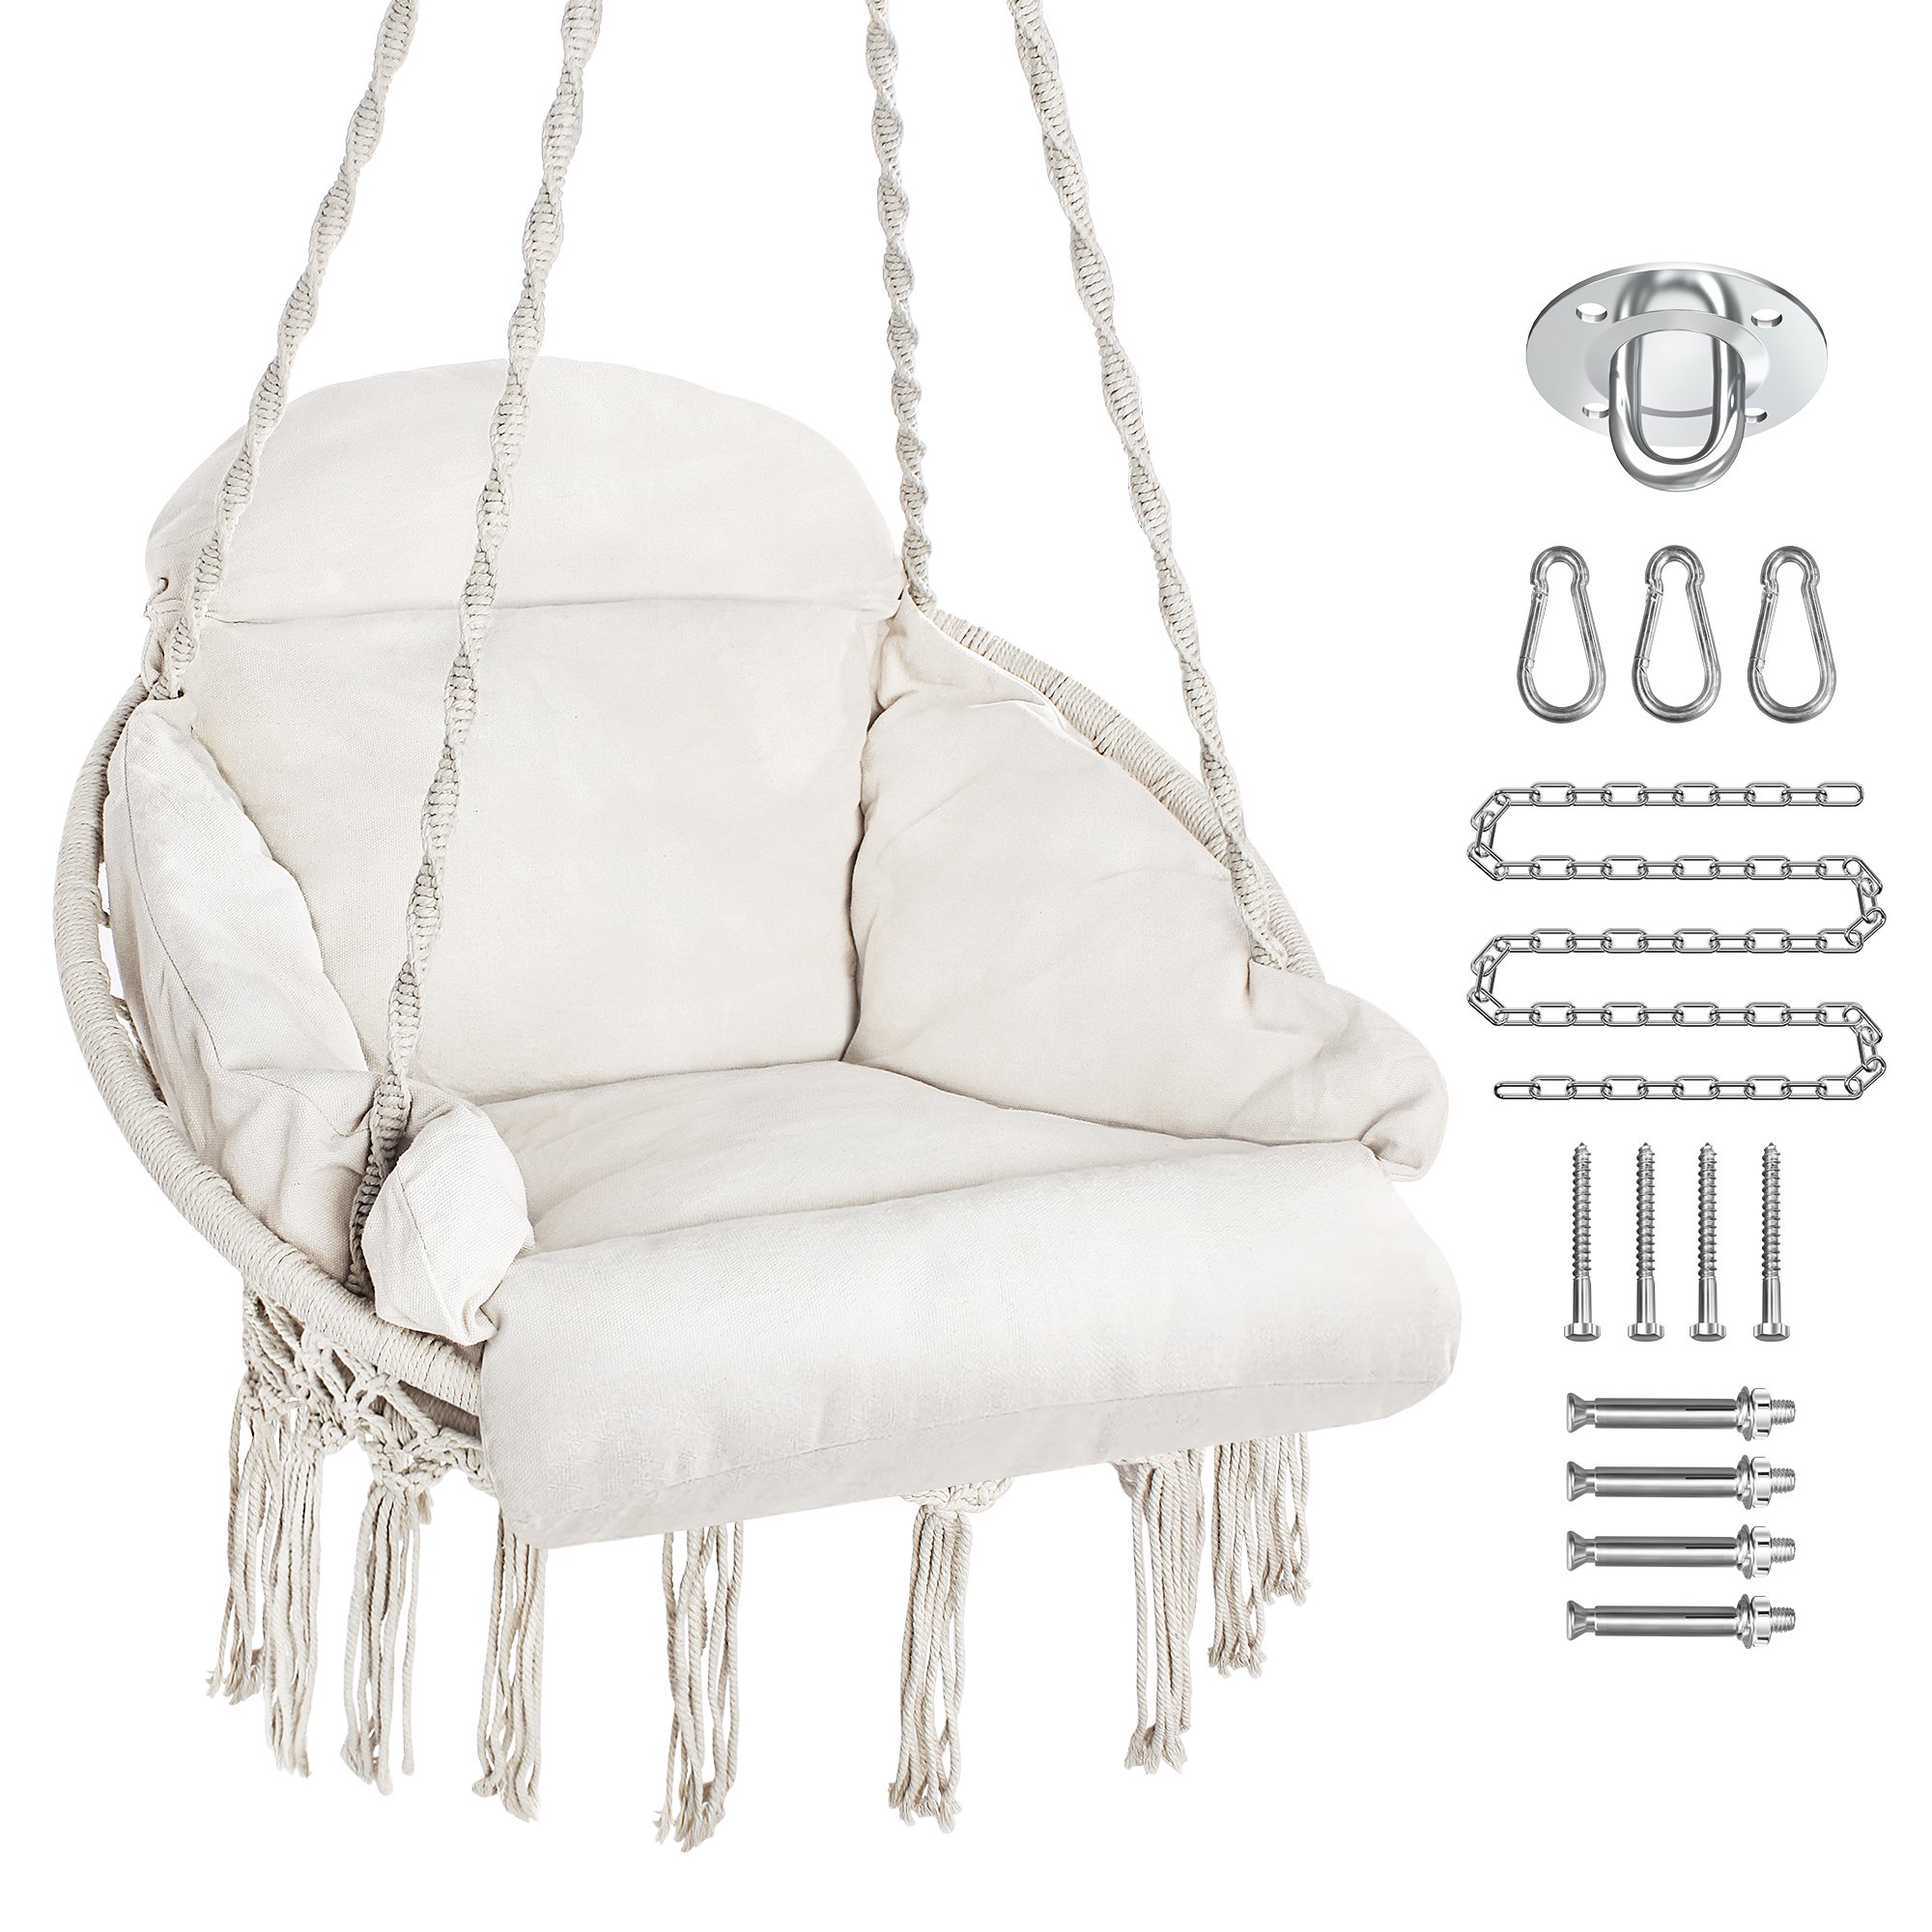 Hammock Chair with Hardware Kit, Macrame Hanging Chair Swing for Bedroom with Heavy Duty Hanging Kit for Ceiling, Cotton Rope Chairs for Indoor Outdoor, Idea Birthday Gifts for Girls Lover - image 1 of 6